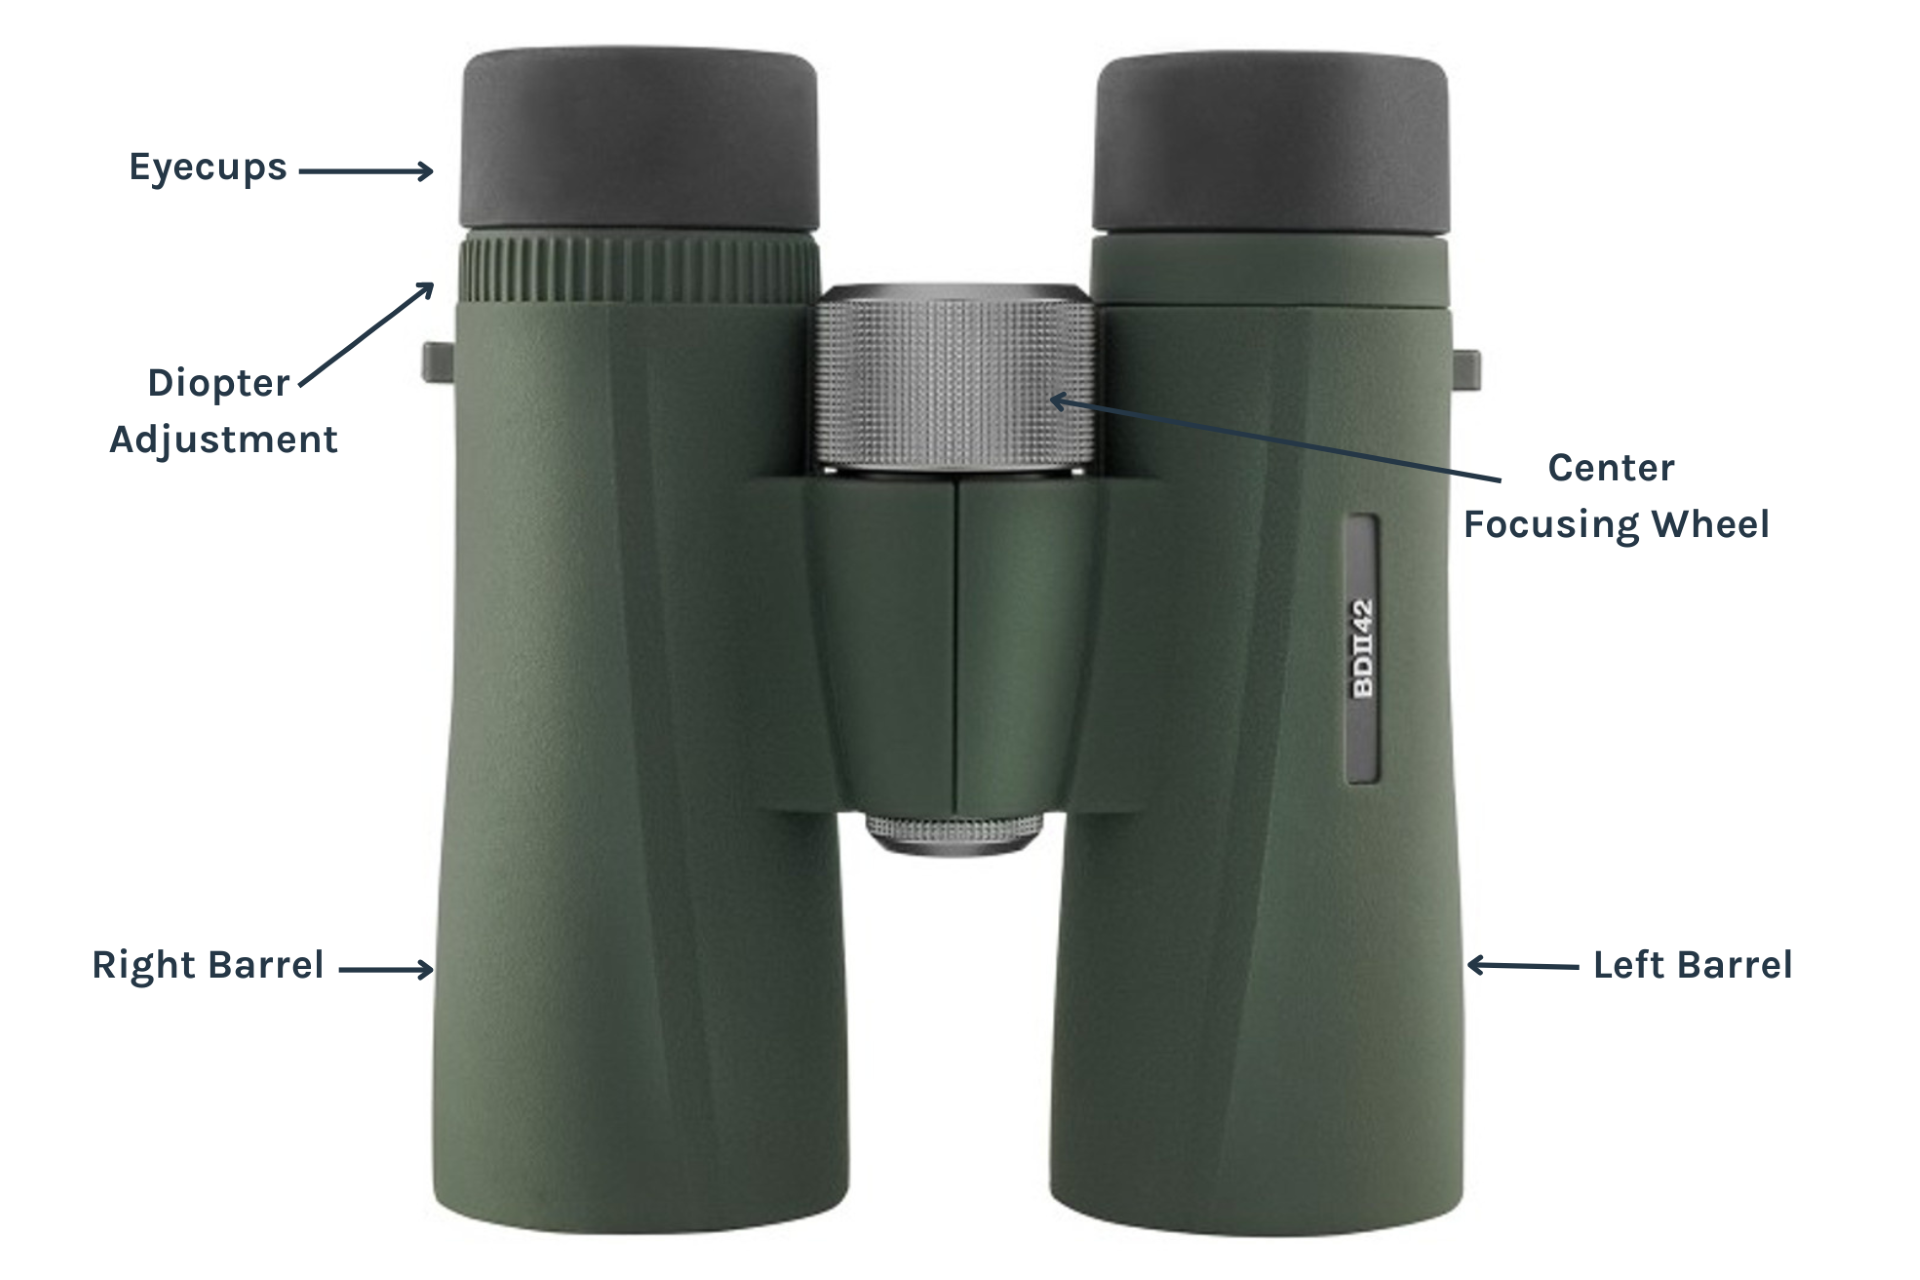 Binoculars with text defining parts